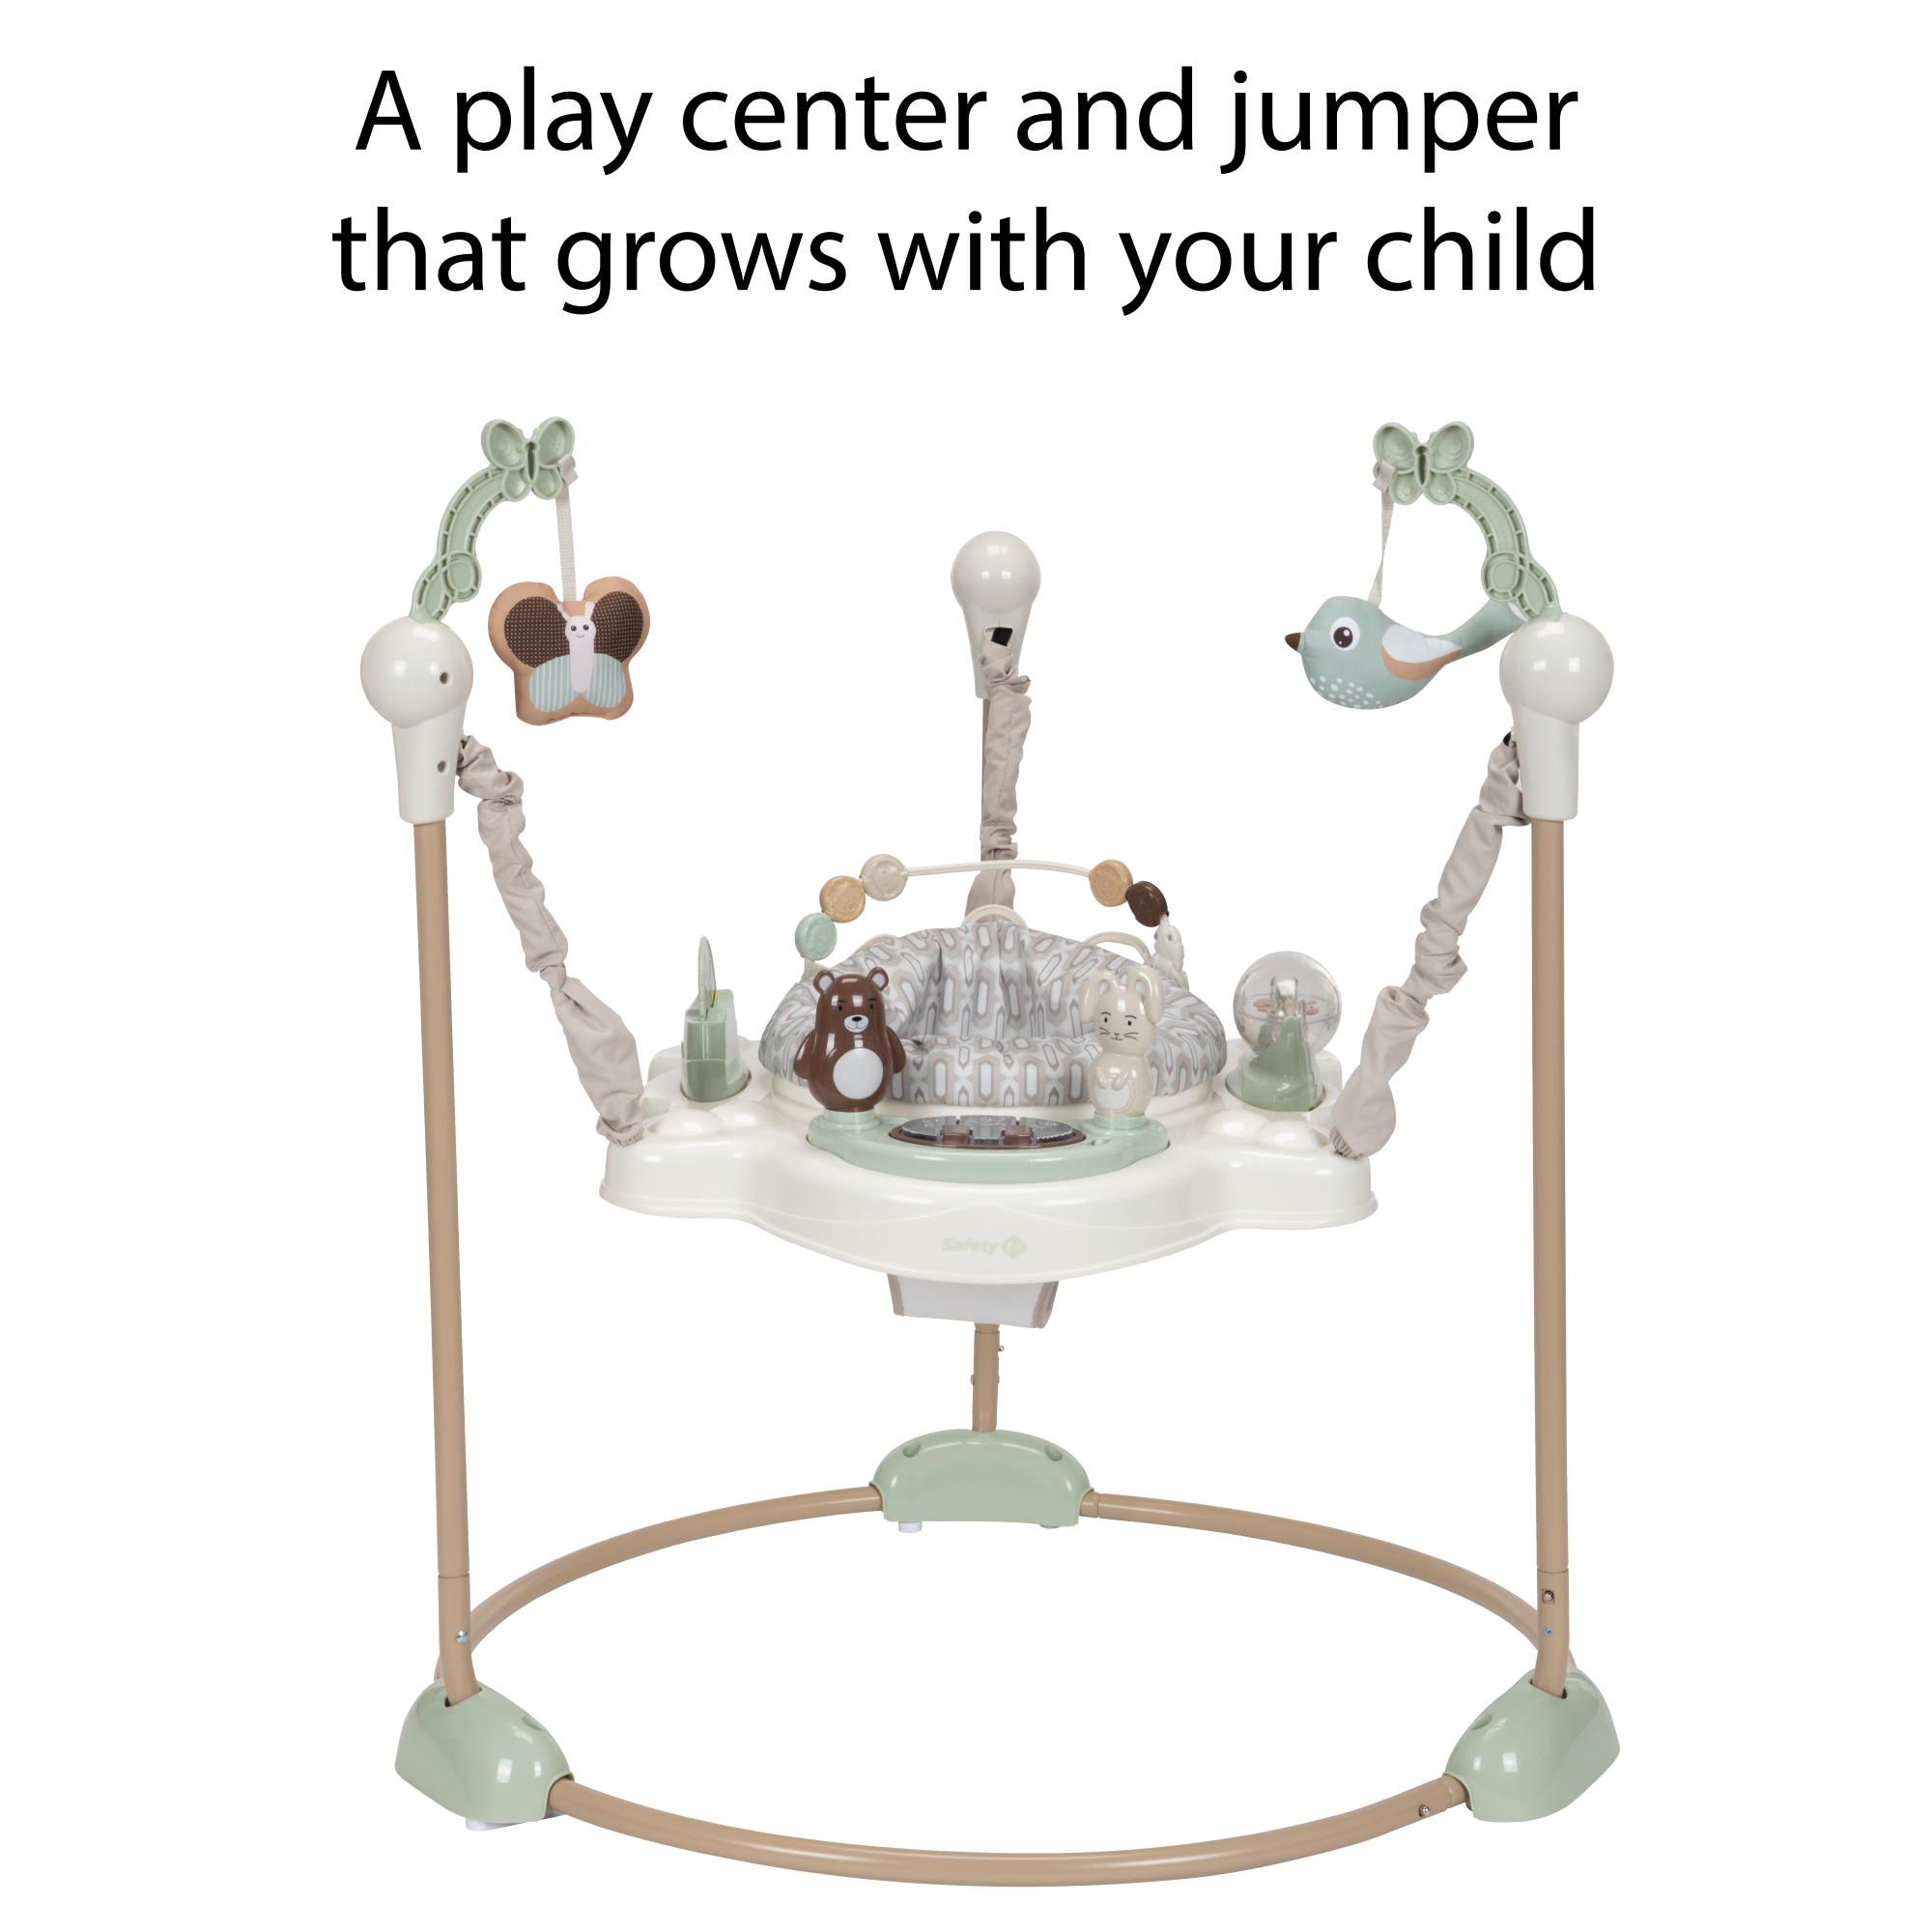 Bob-and-Twist™ Activity Center - a play center and jumper that grows with your child